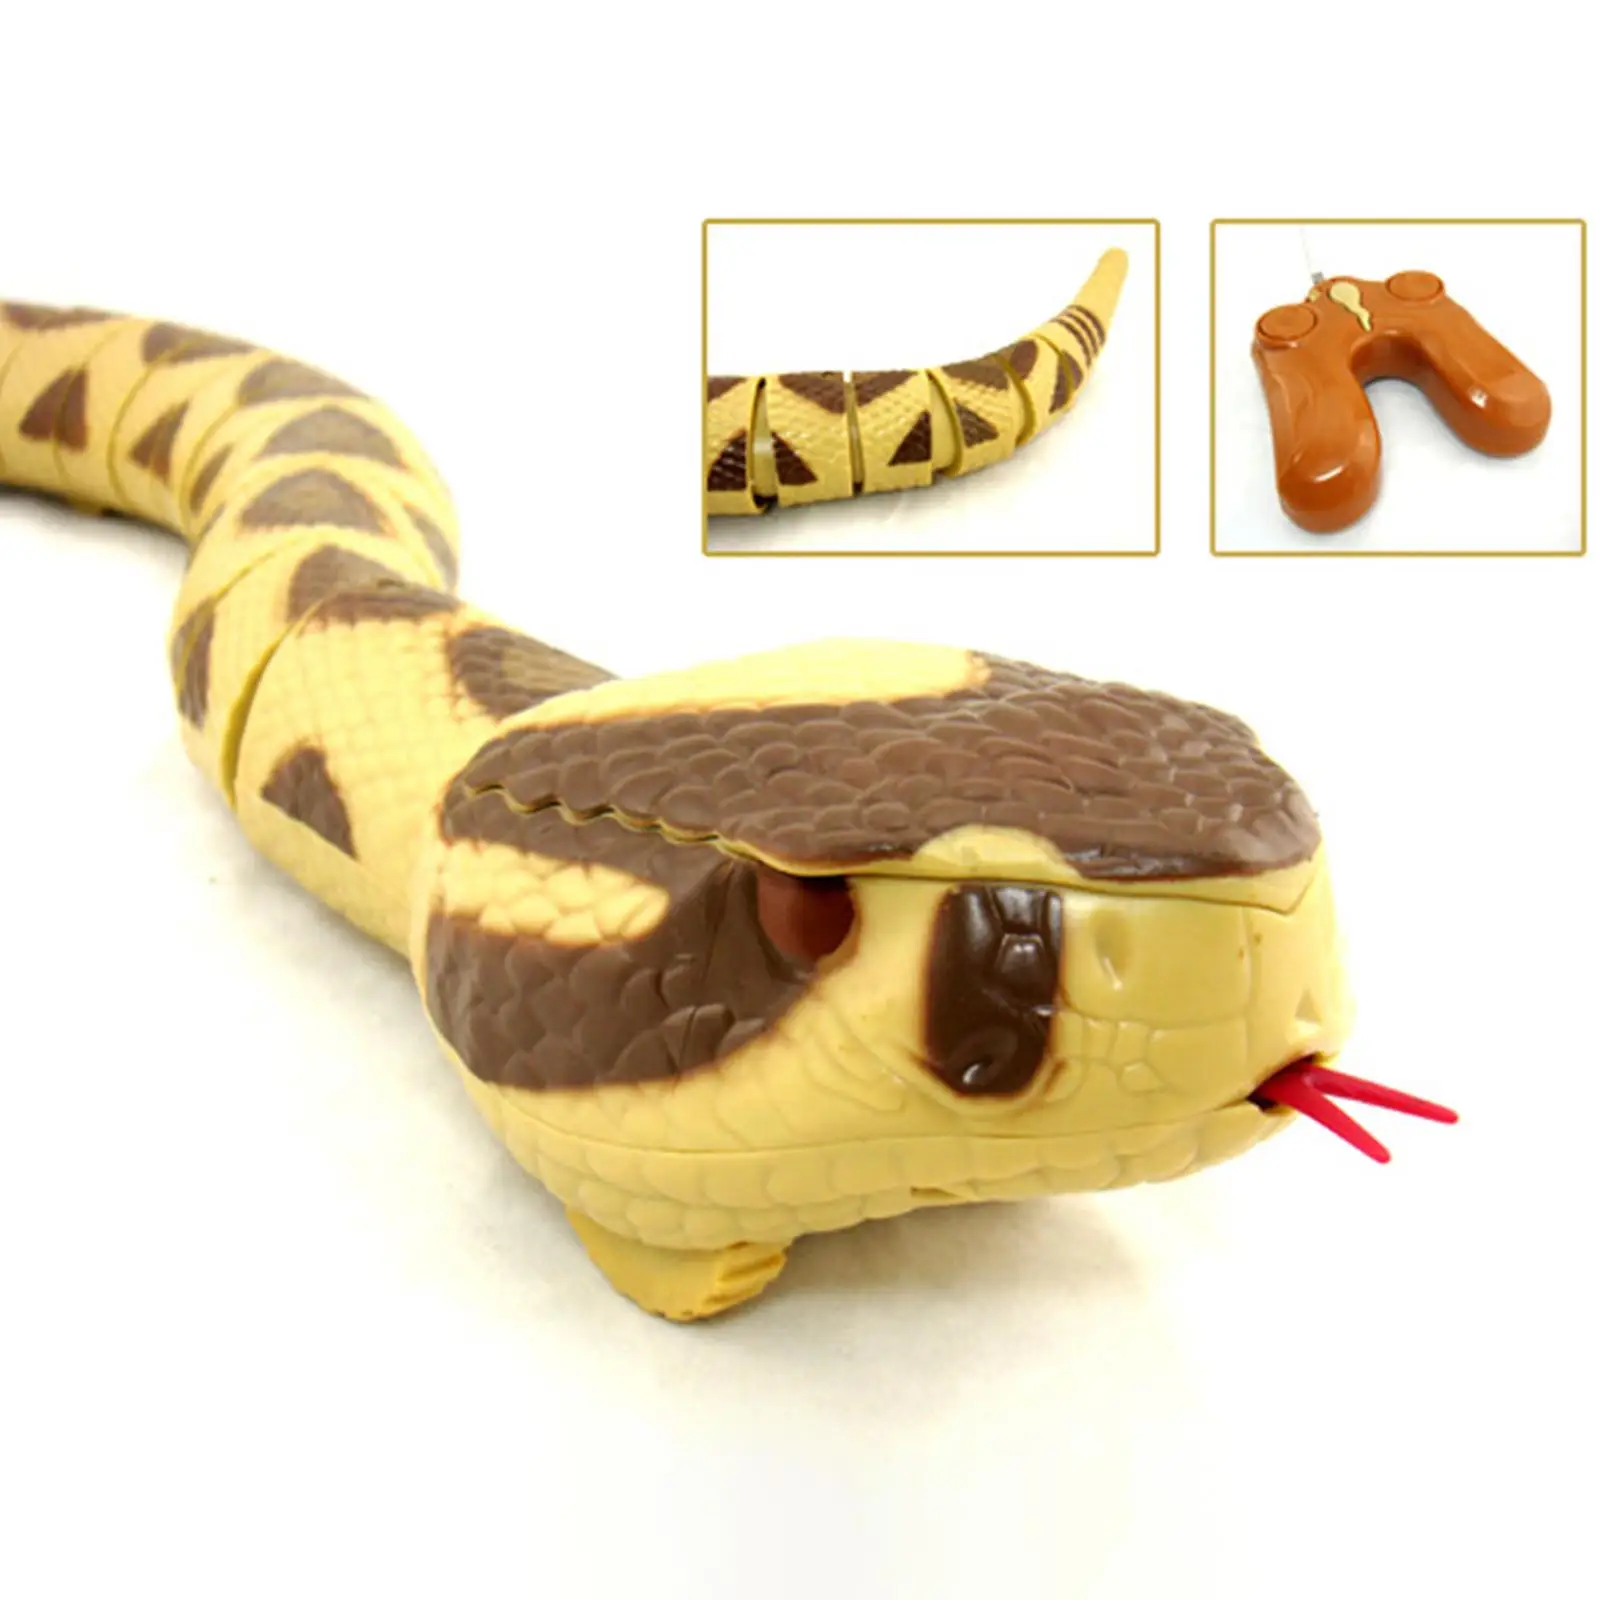 Lifelike RC Snake Toys Scary Snake Toy Party Favors for Party Holiday Gifts